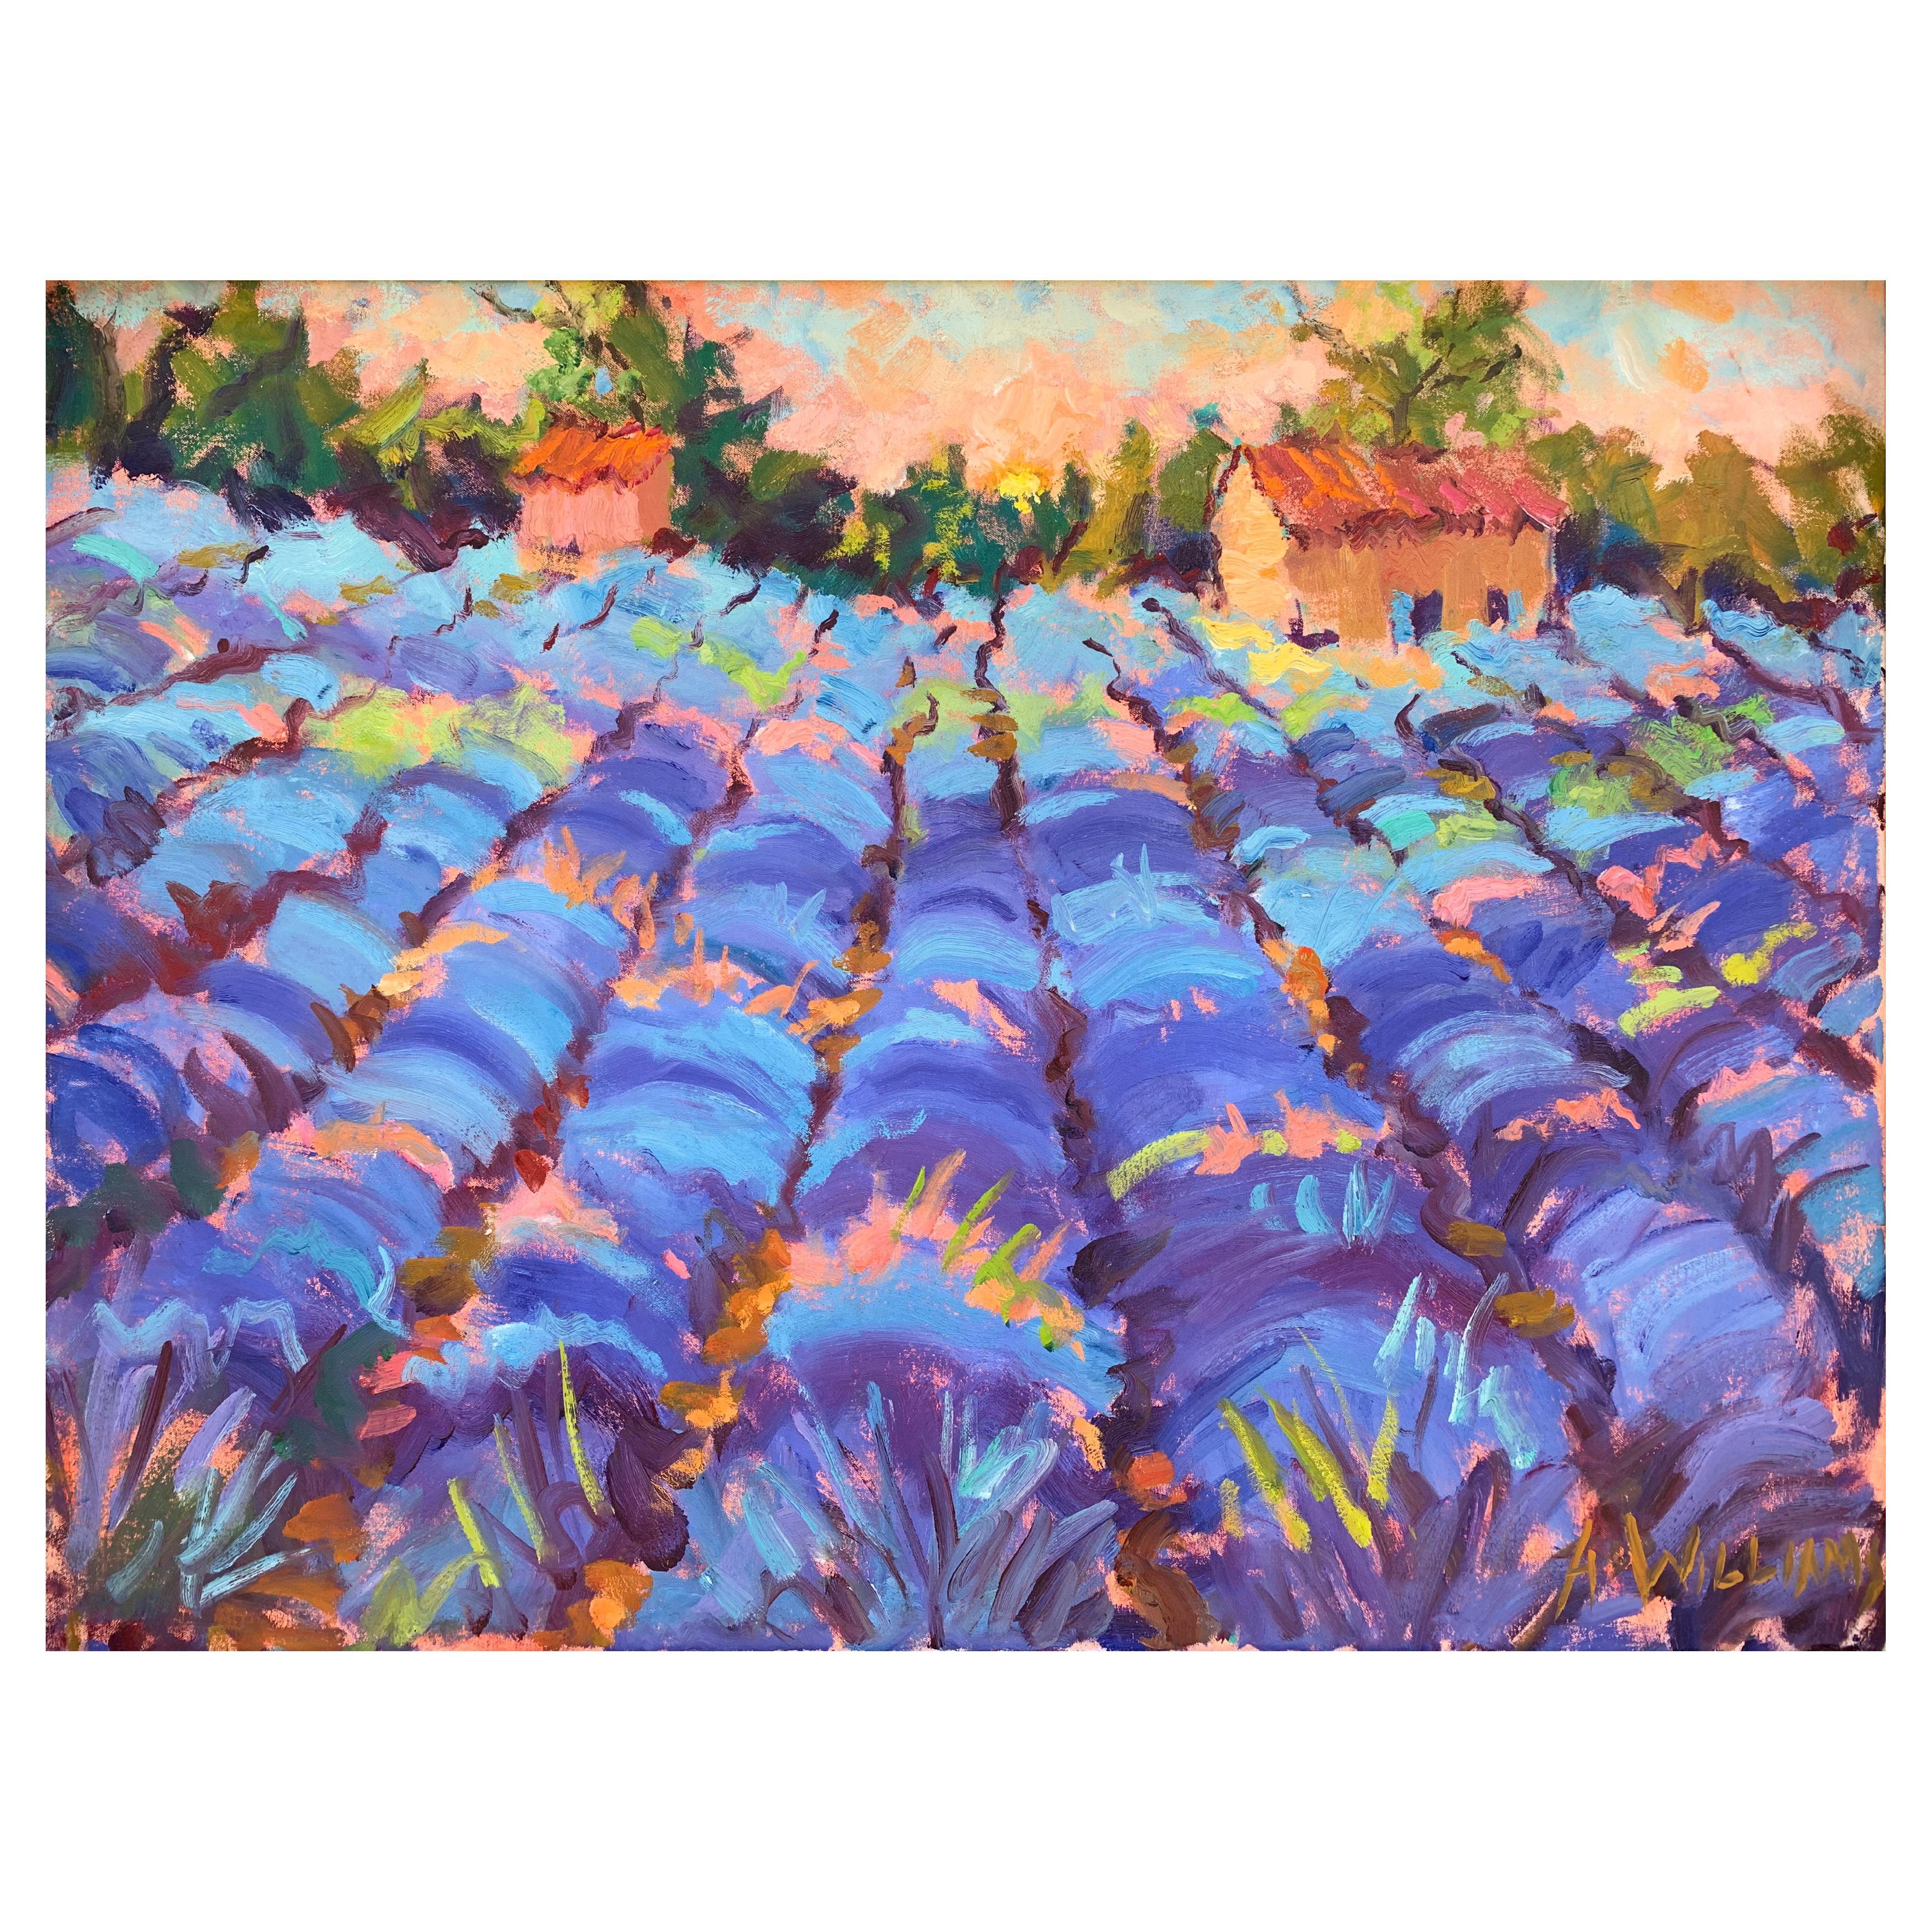 Framed Oil on Canvas "Lavandula" 'Lavender Fields in Provence' by Alice Williams